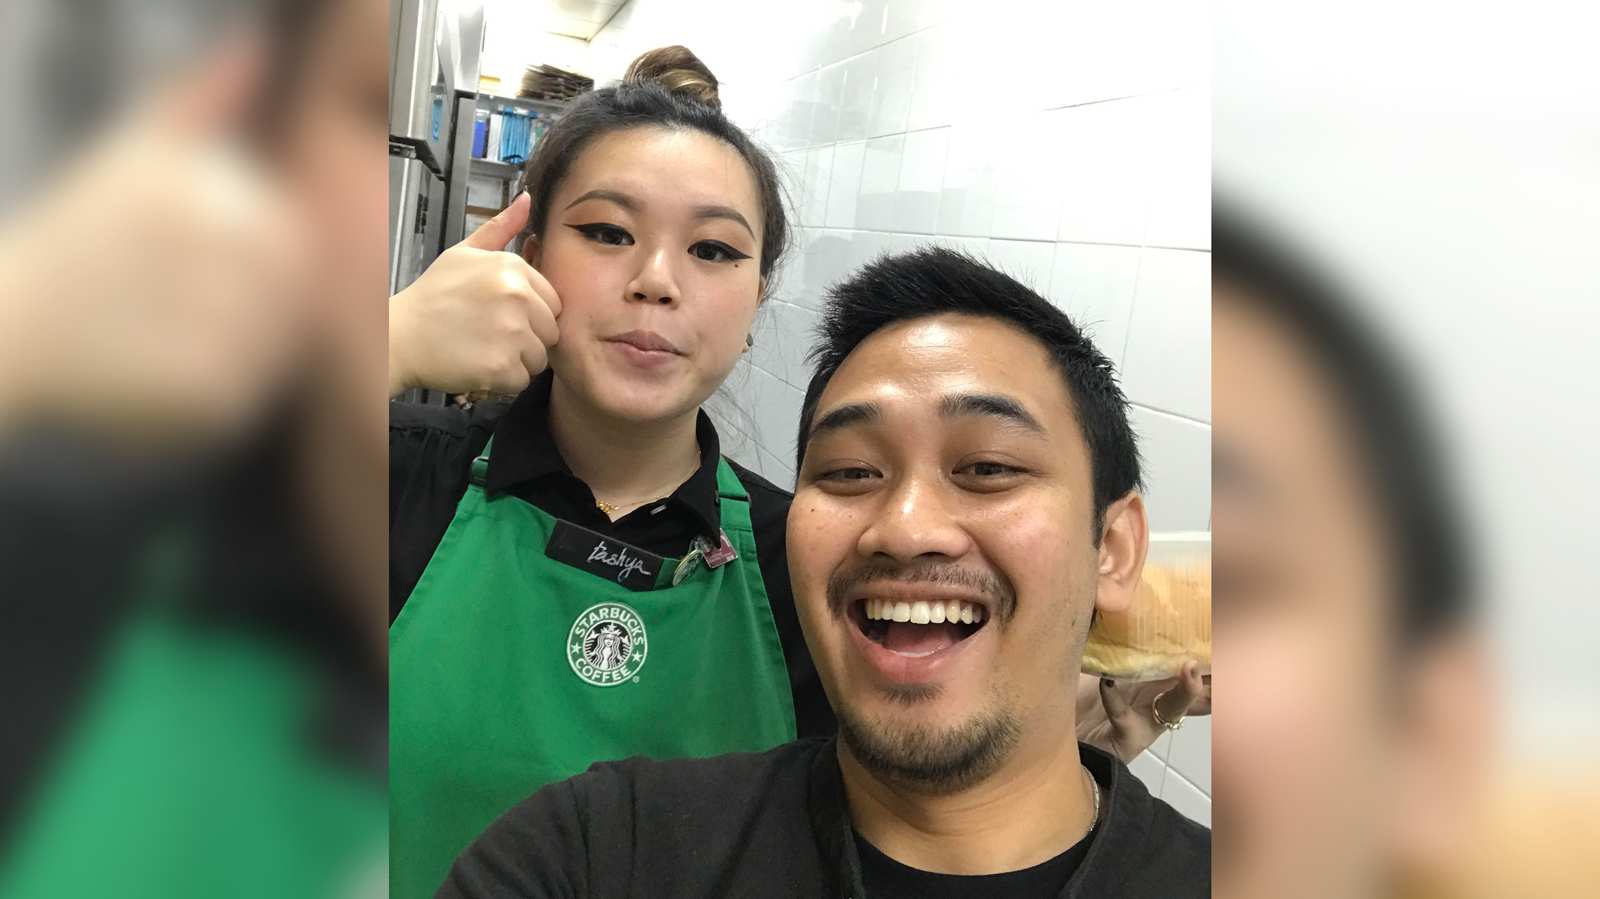 Starbucks baristas find and return man’s phone – but not before leaving him a selfie on it